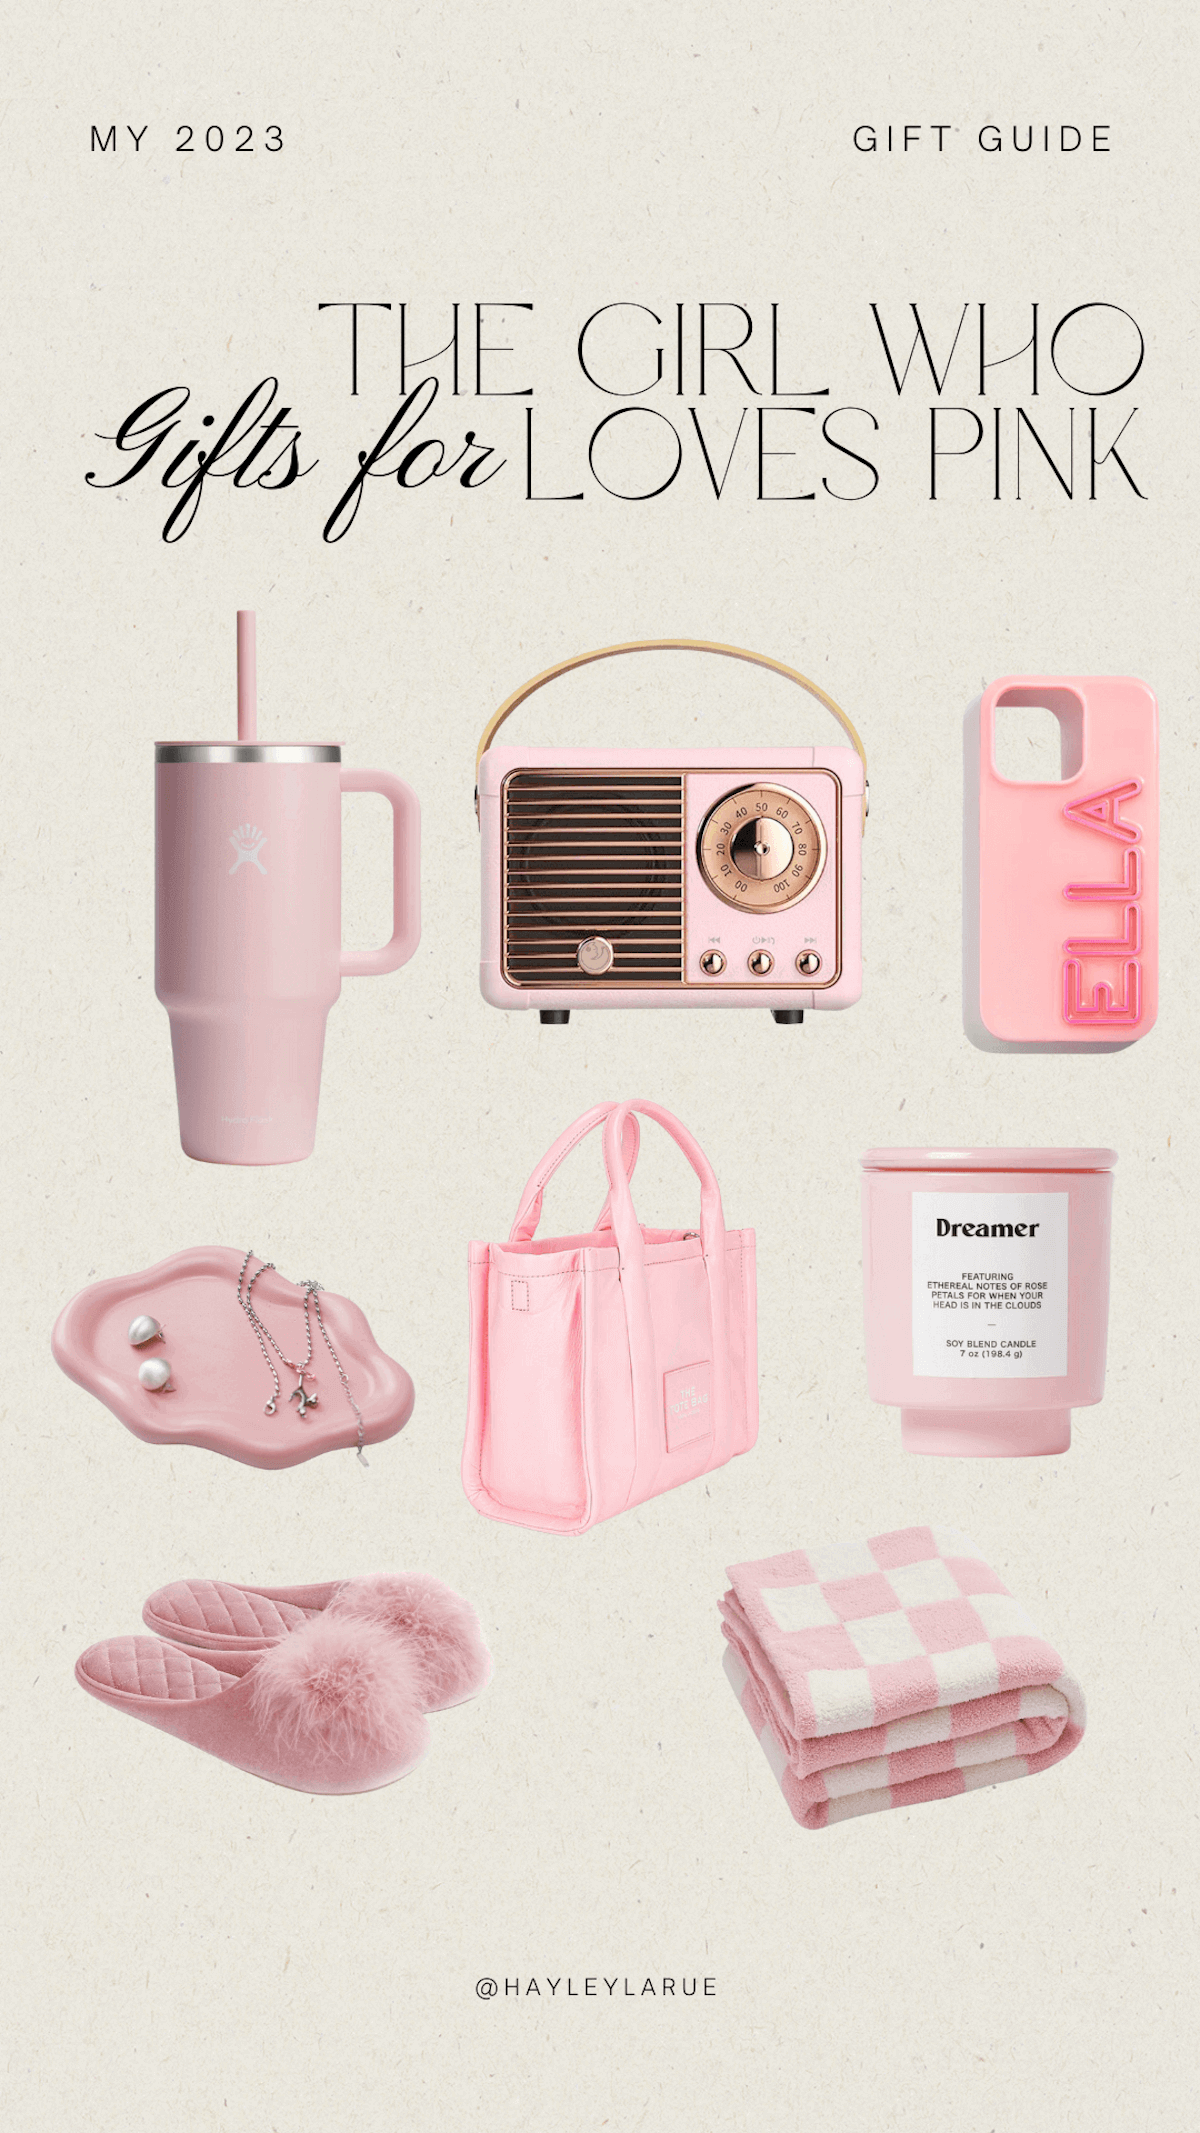 Gift Guide for The Girl who Loves Pink | Gift Guide